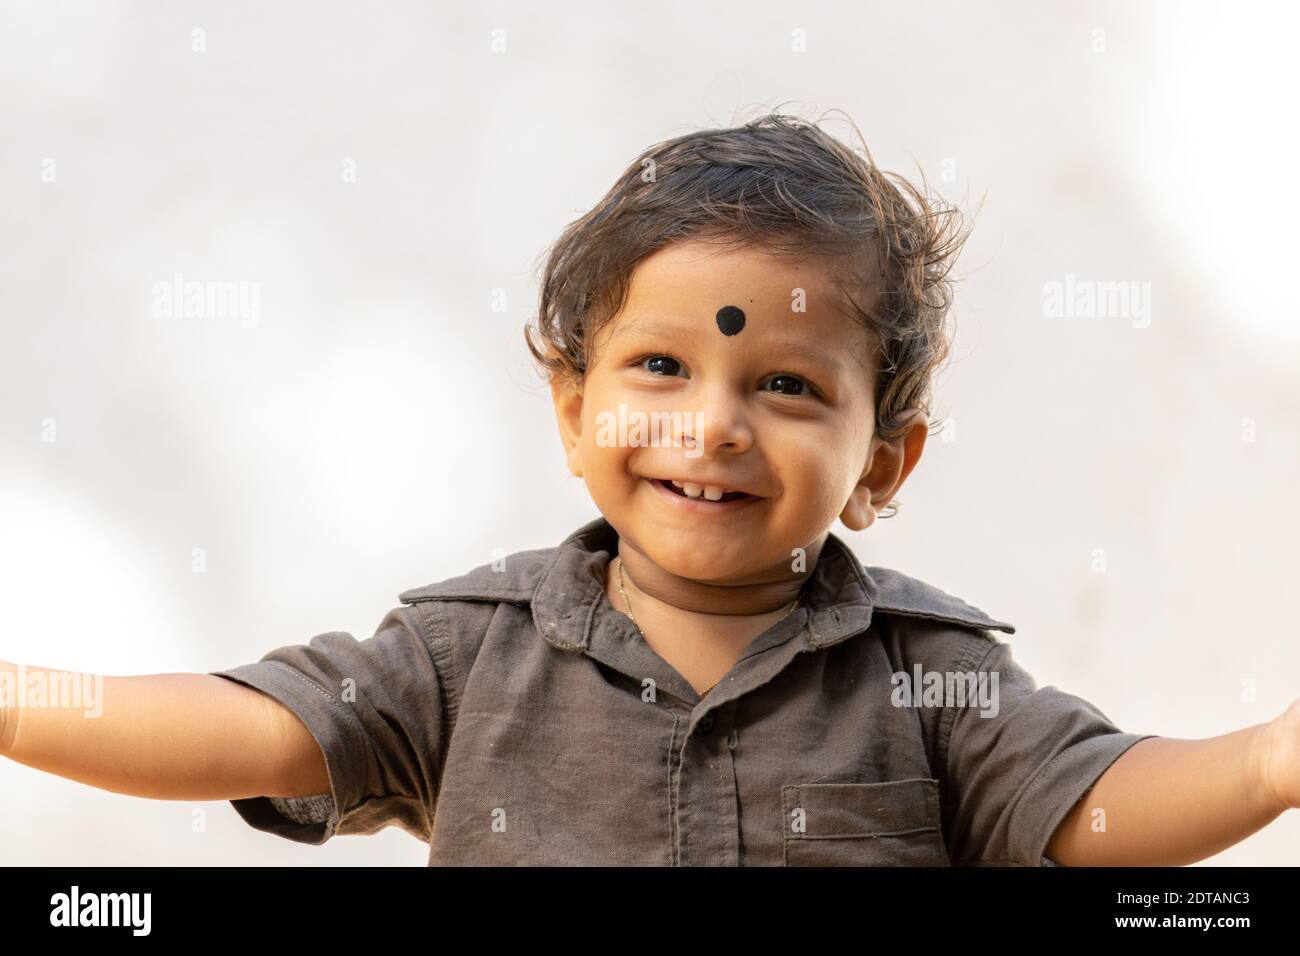 1 year old birthday boy arm raised with a dot in his forehead smiling , happiness of the kids concept. Stock Photo